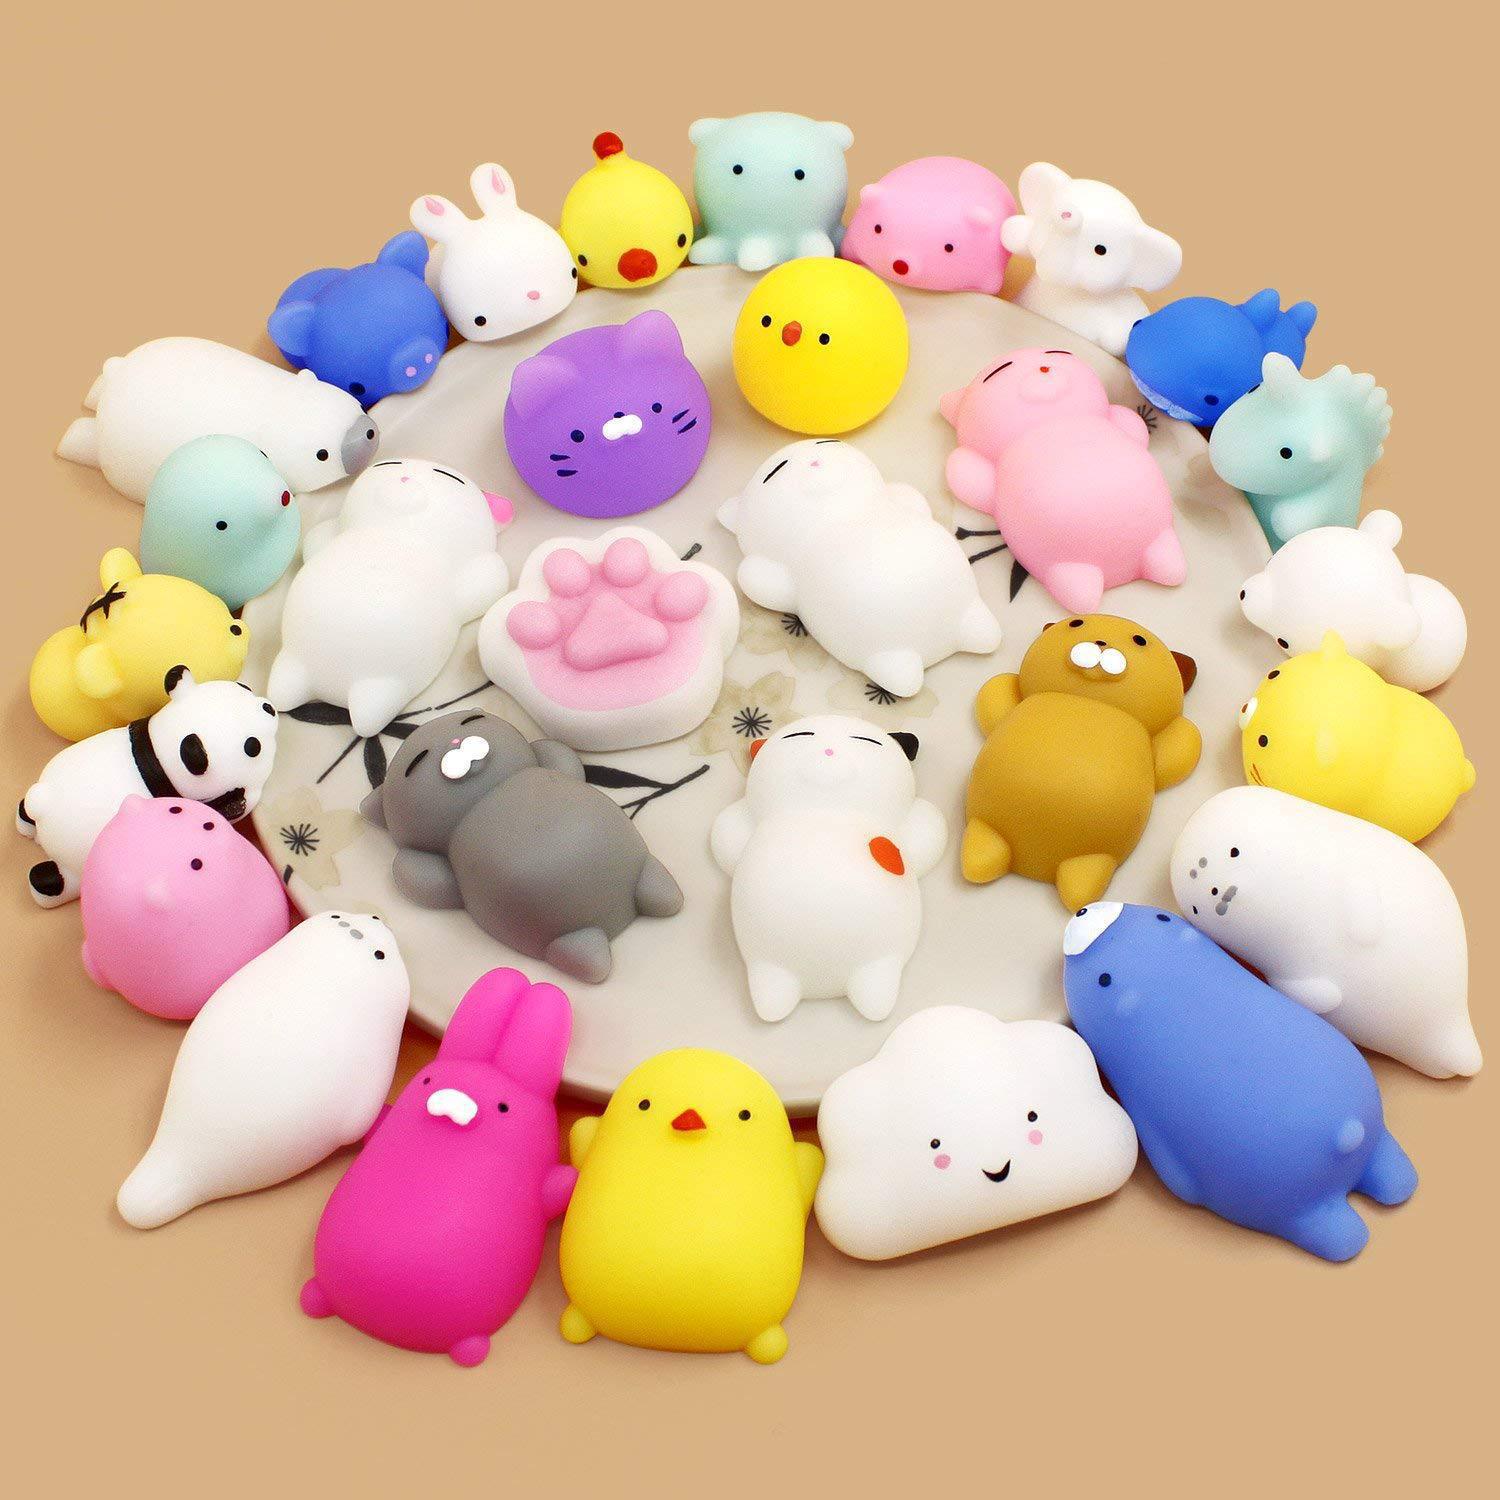 Cute Animal Ball Squeezing Toy Squeeze Ball Decompression Trick Vent Ball Student Small Gift Children's Toy Wholesale